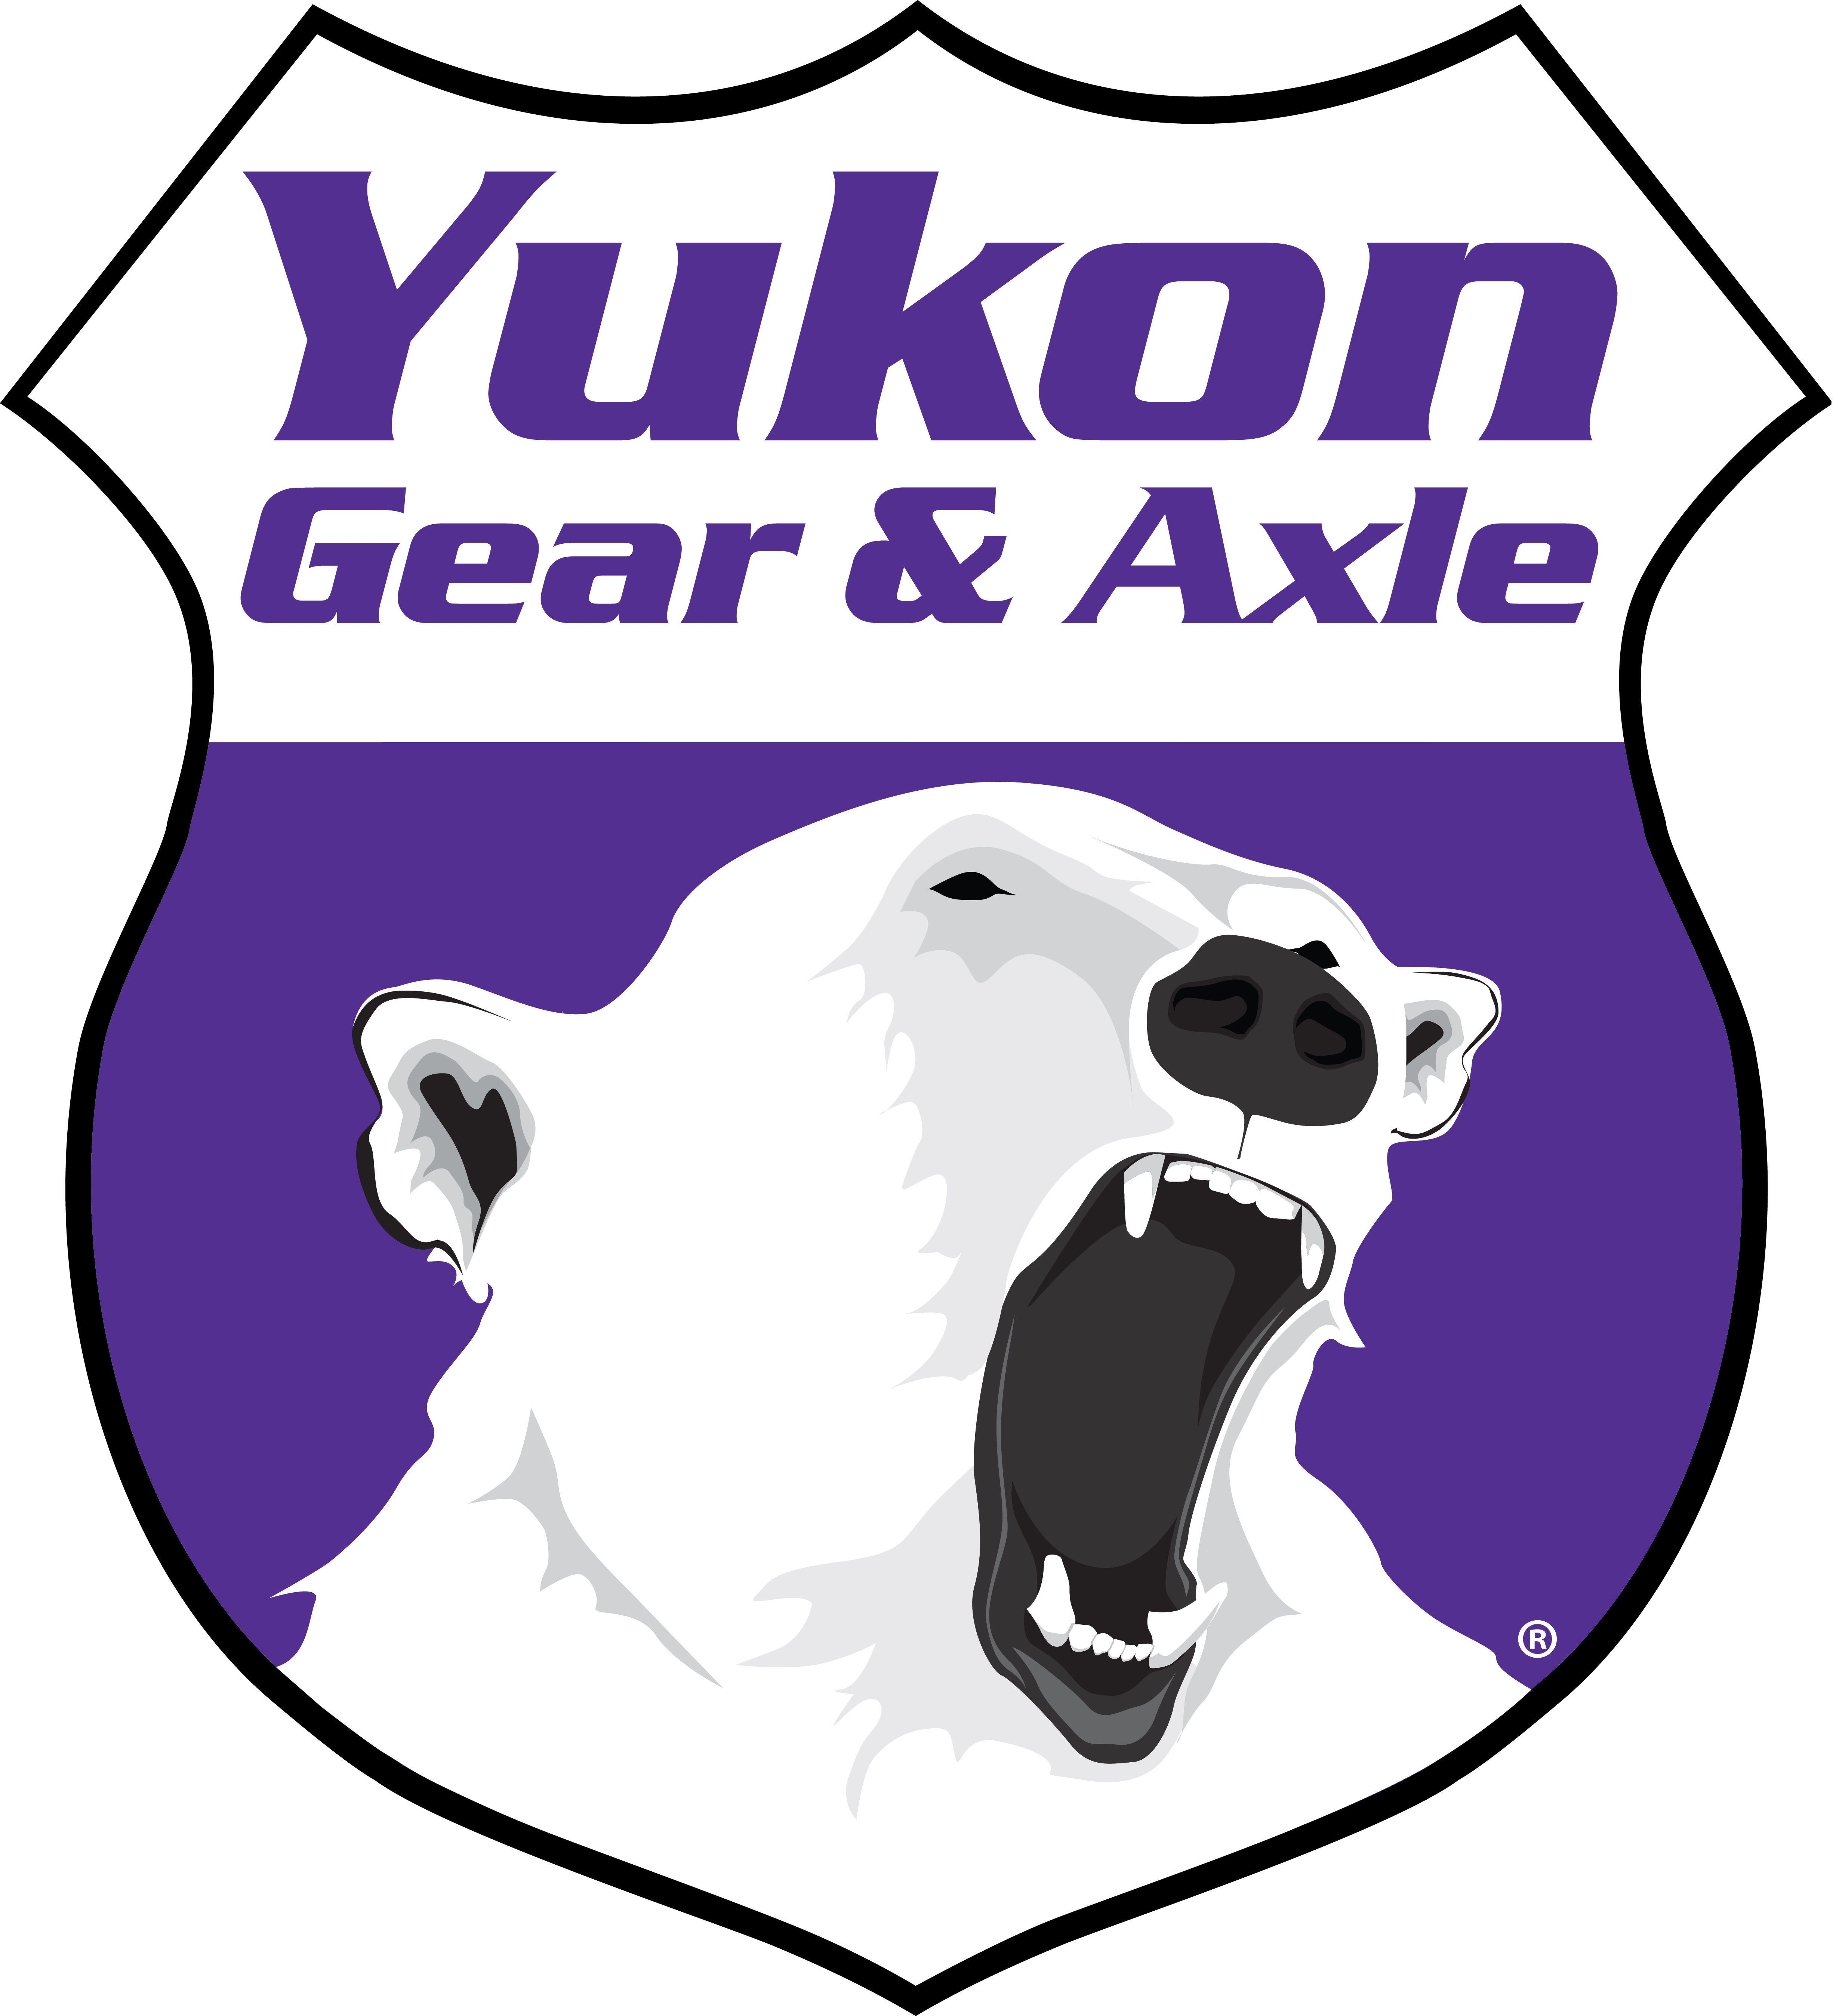 Yukon yoke for '98 and newer GM 9.5" with a 1350 u-joint and triple lip design 